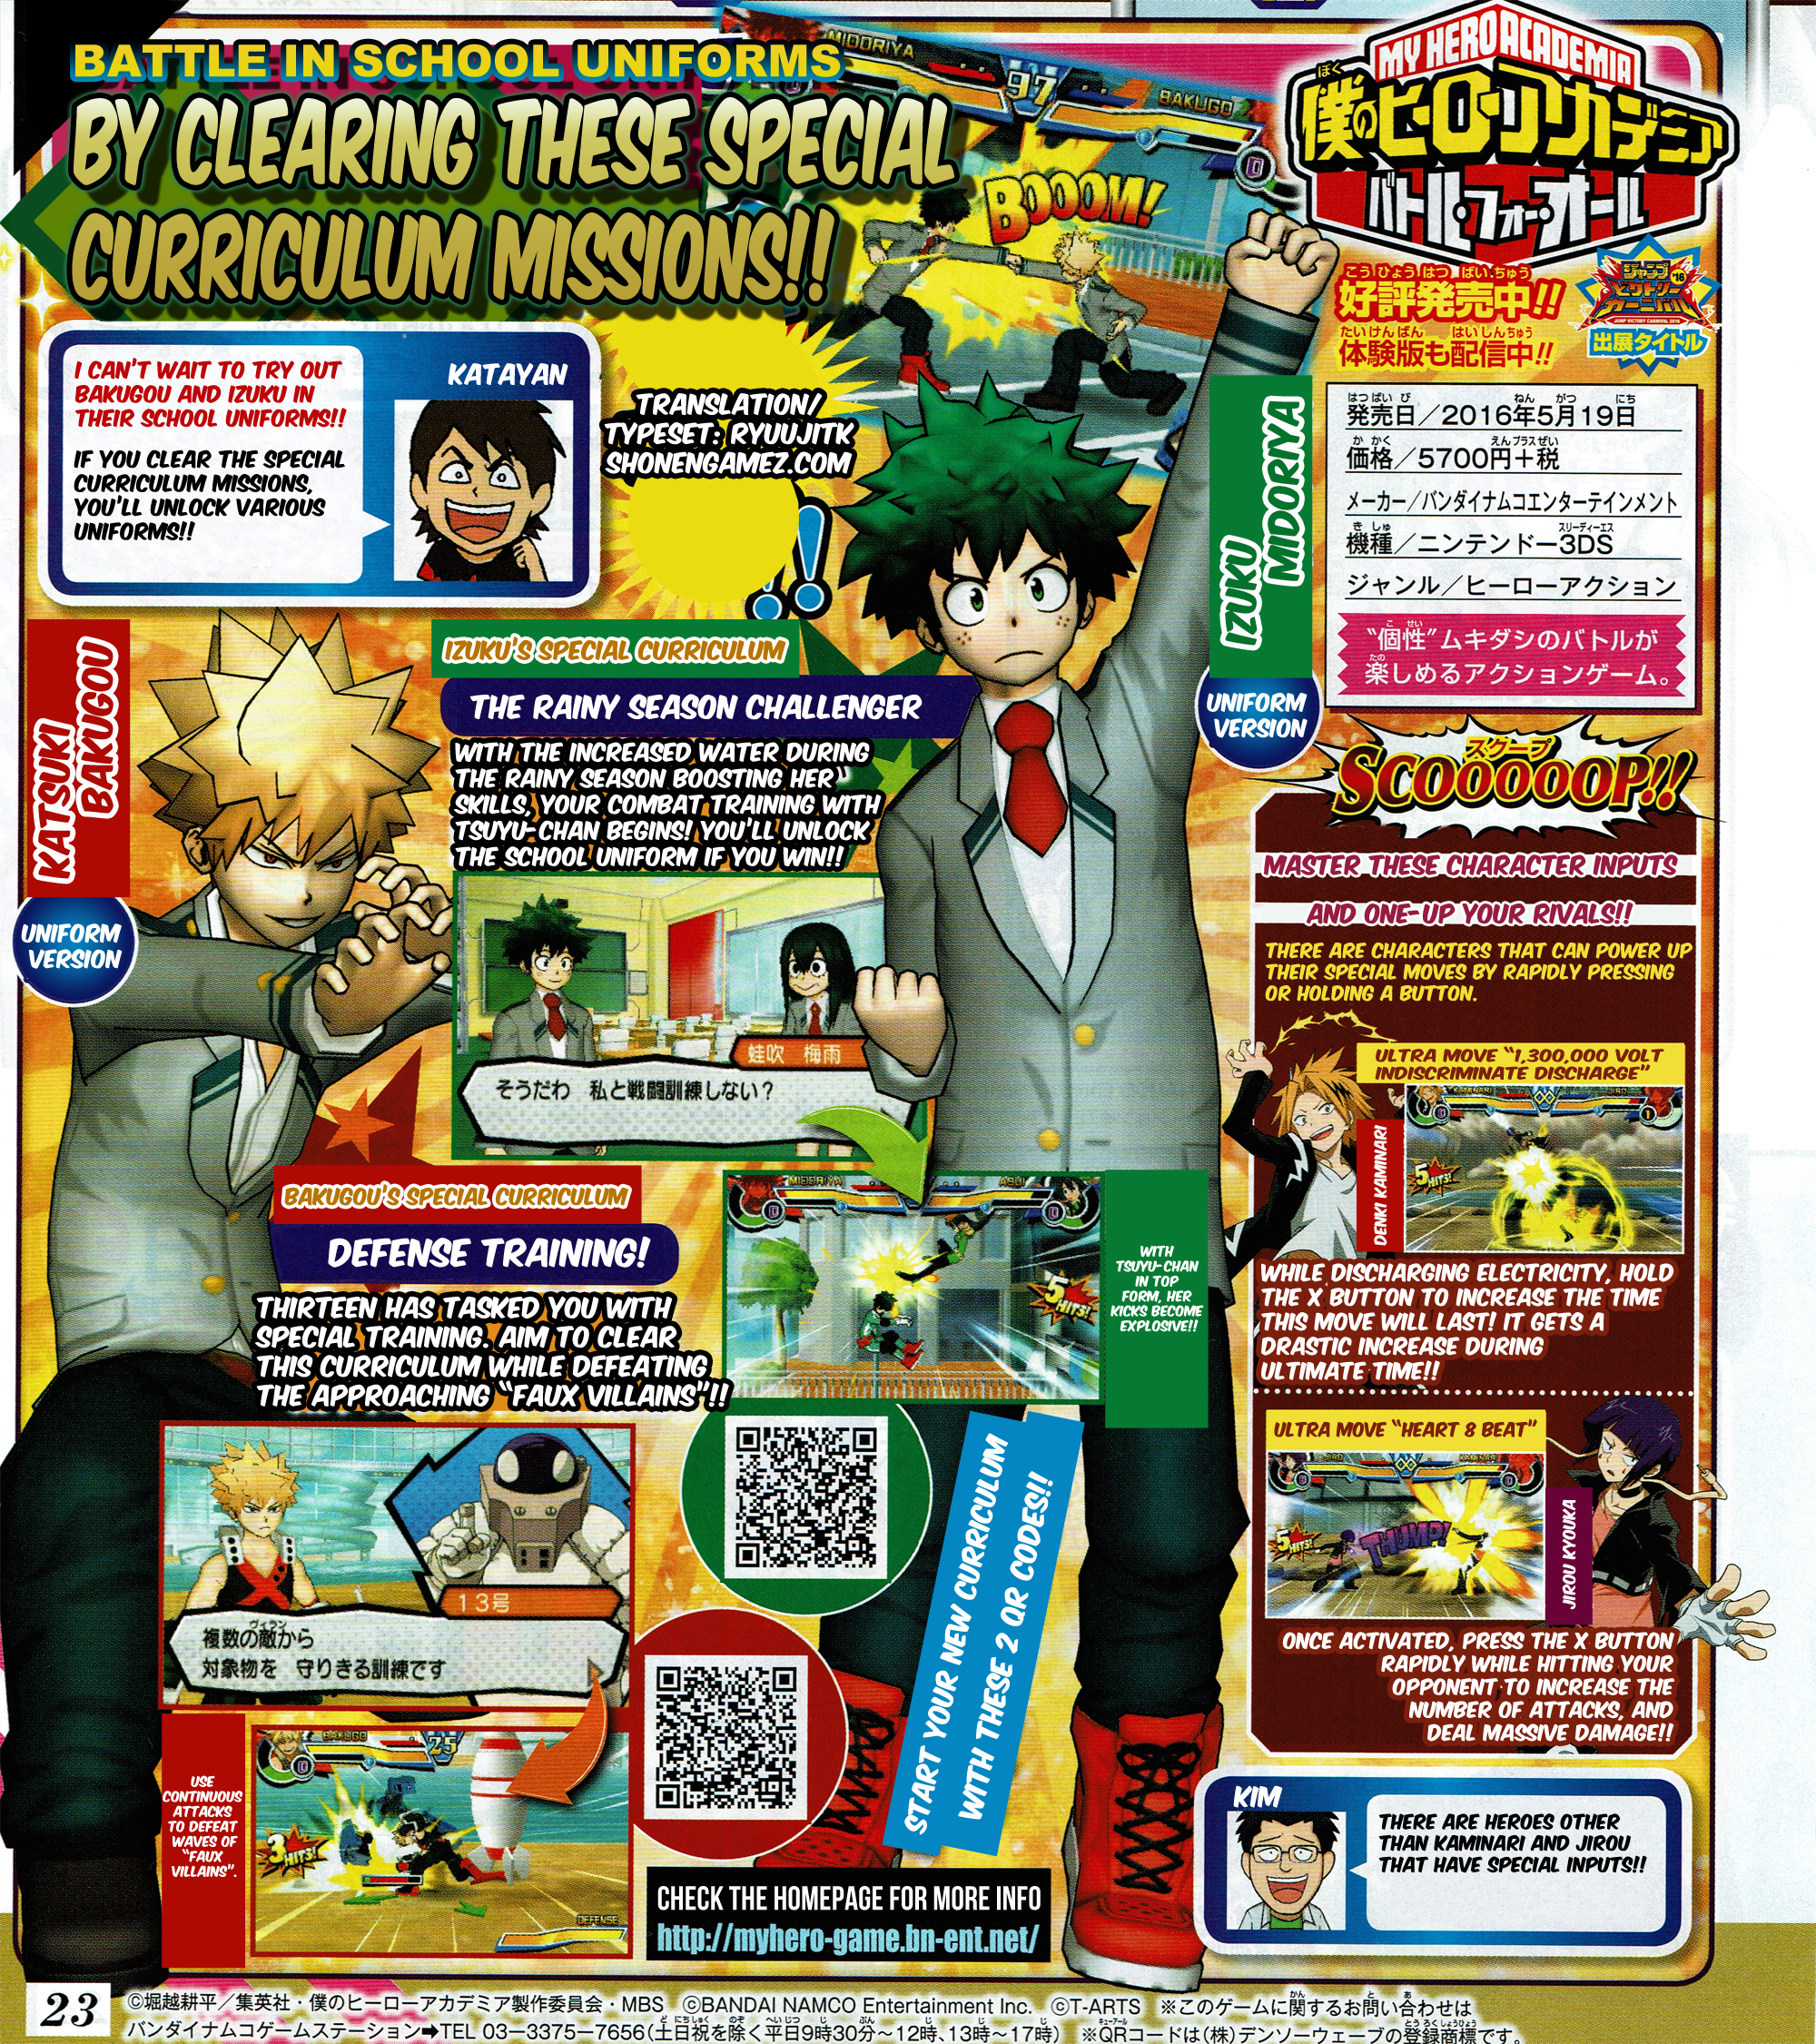 Heroes Academia codes for jolly rewards